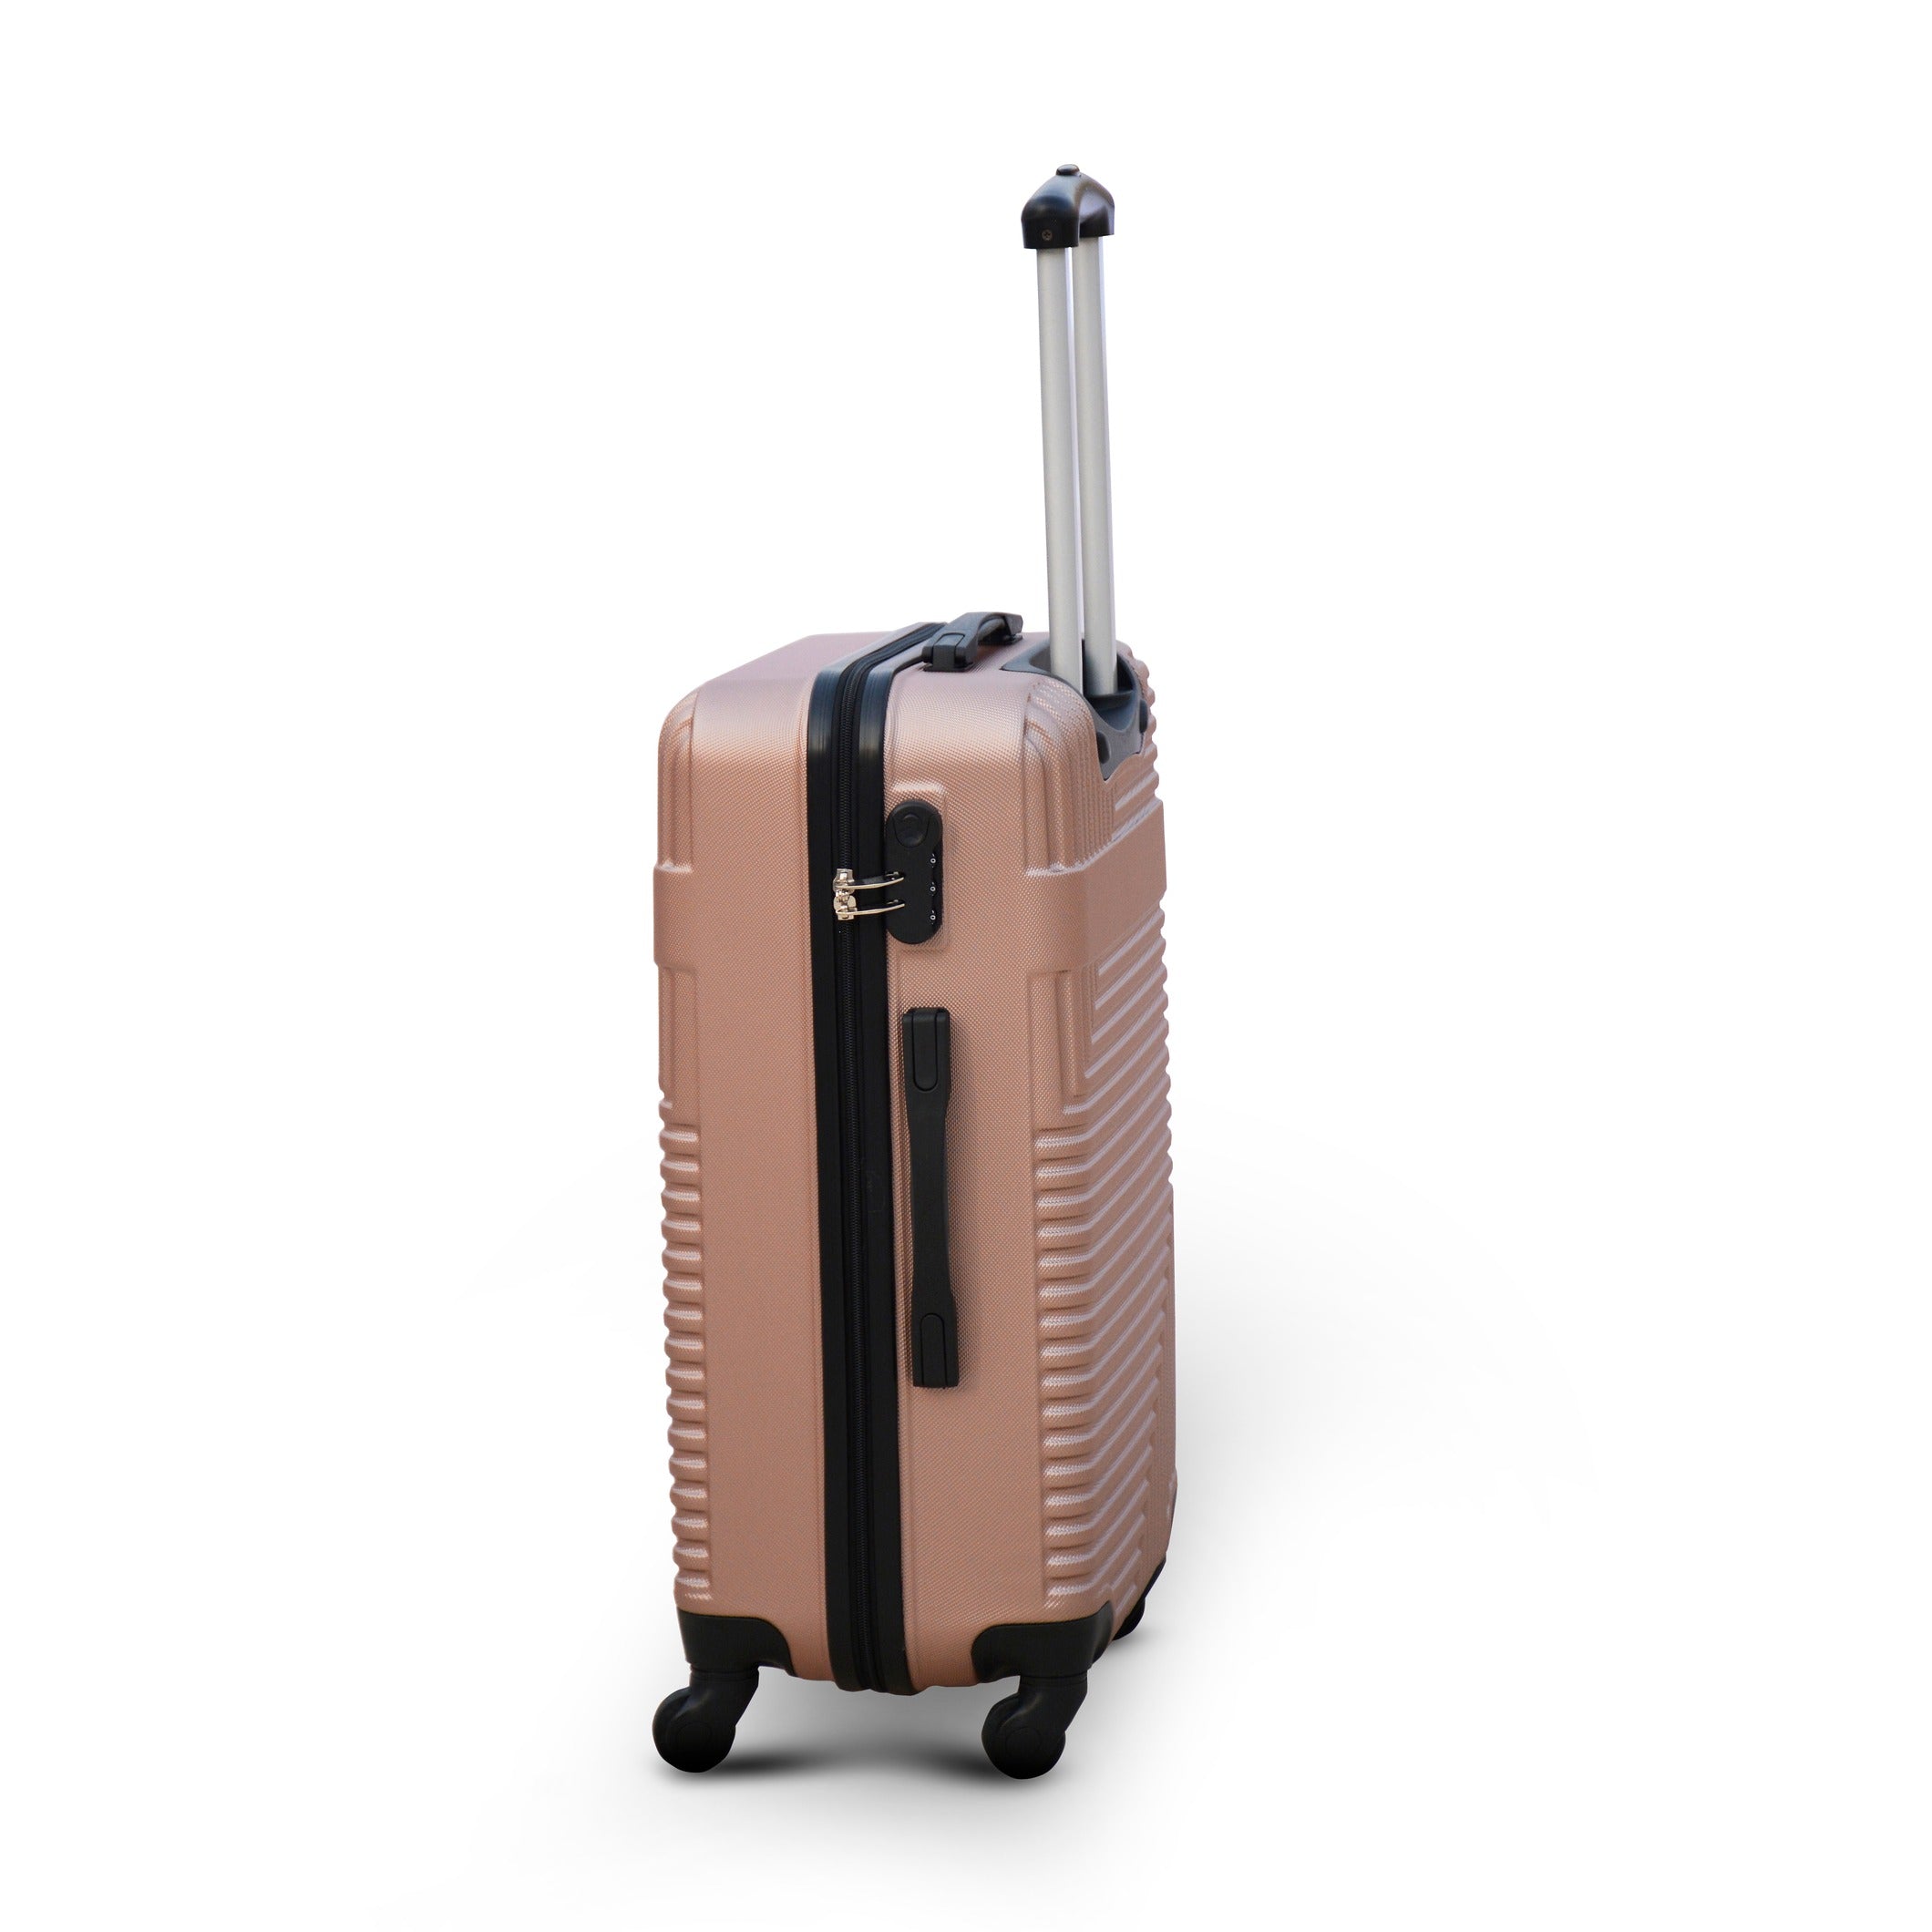 24" Rose Gold Colour Travel Way ABS Luggage Lightweight Hard Case Trolley Bag